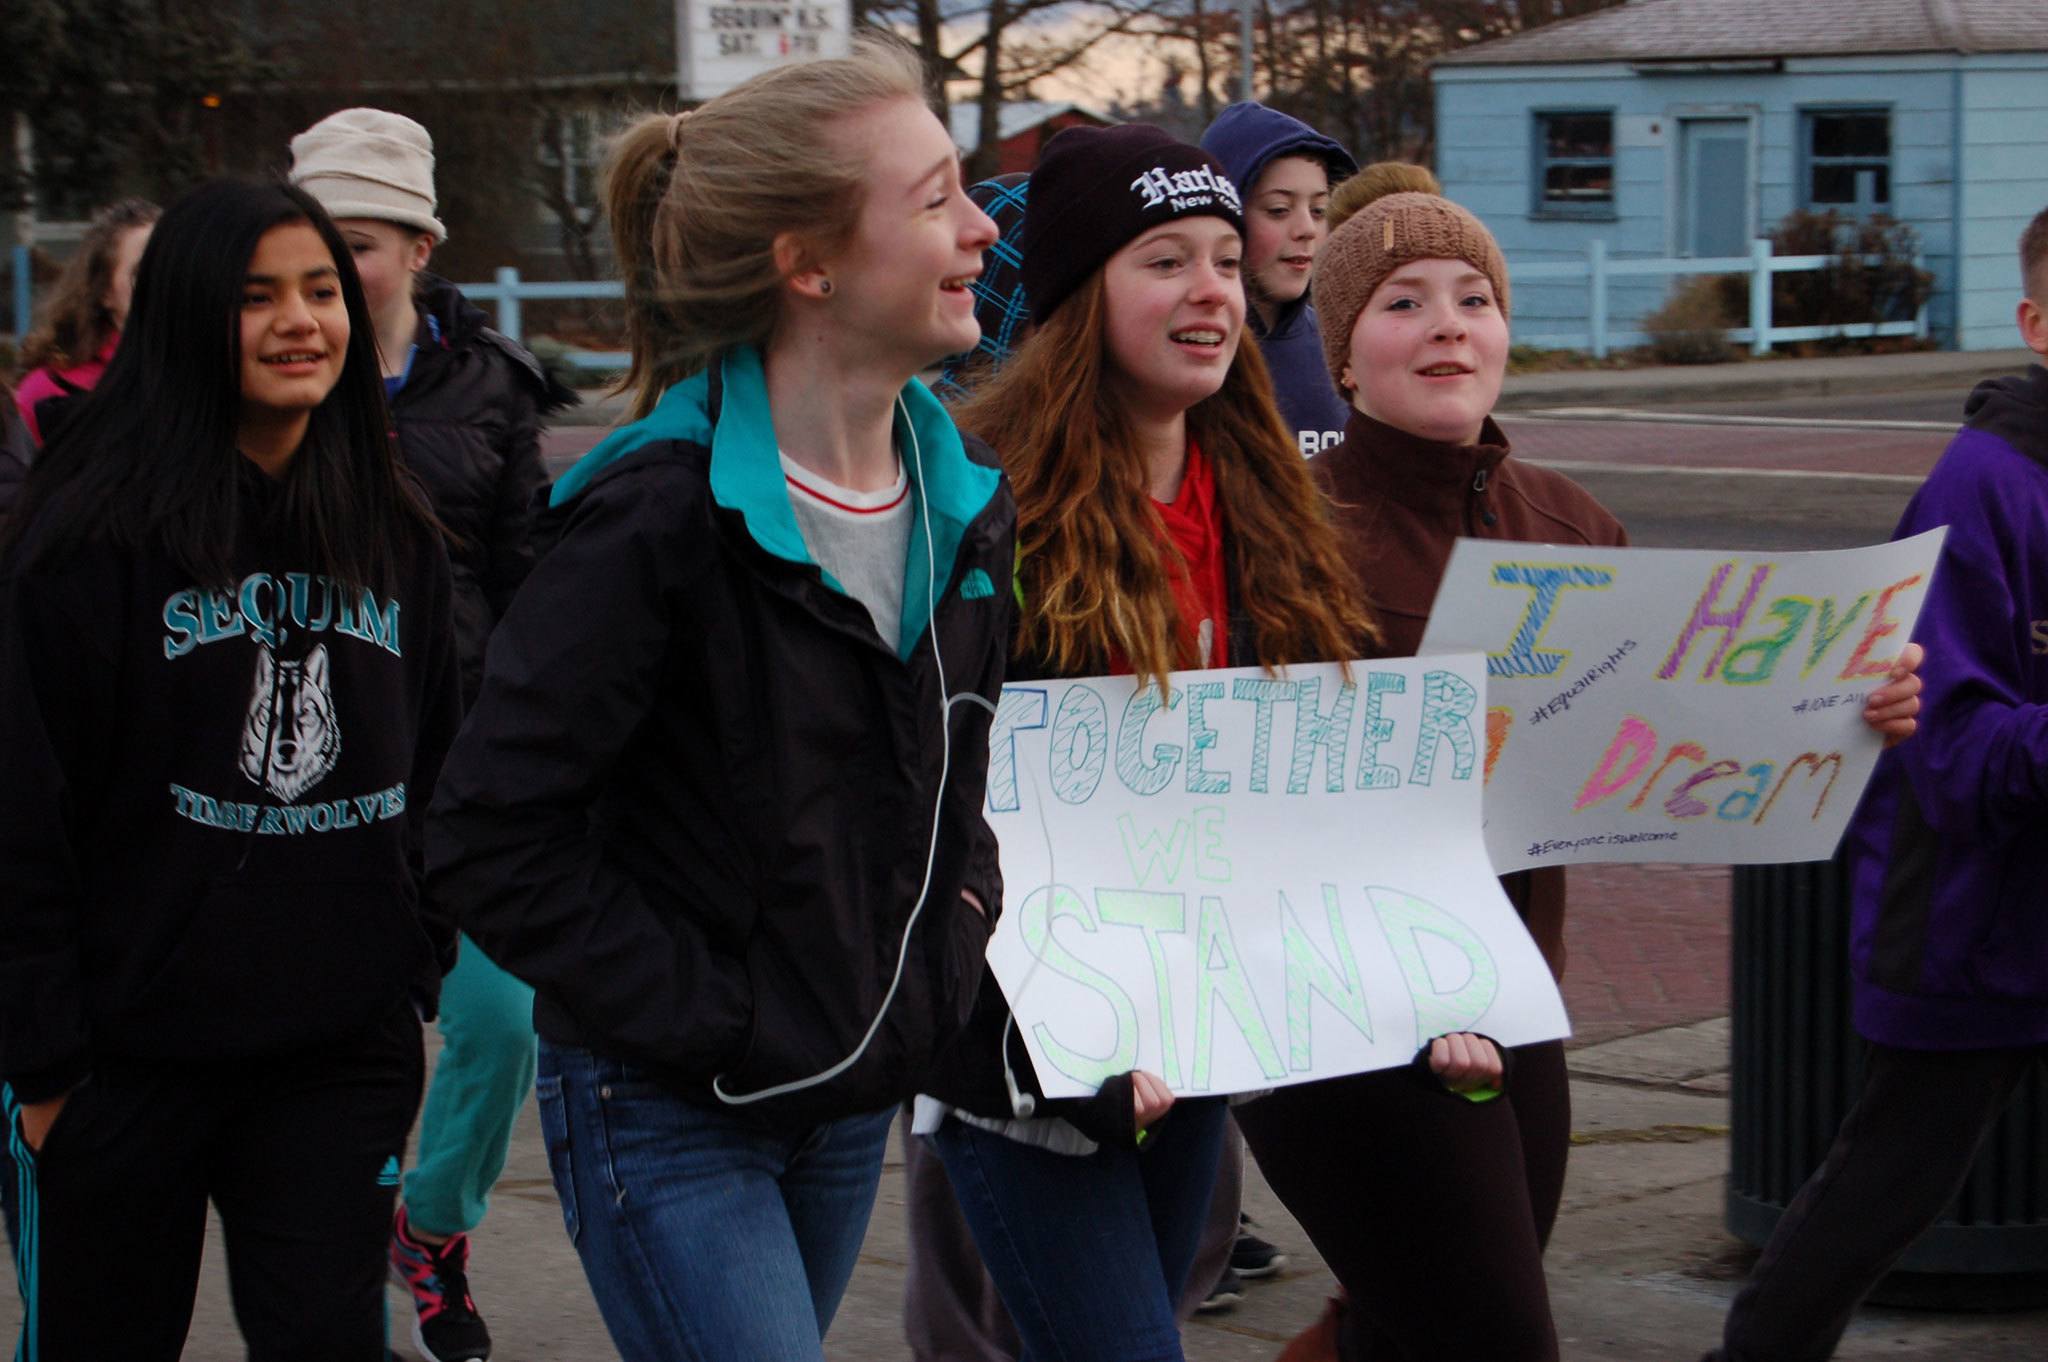 Eighth-graders Olivia Preston (right) and Mary Mcaller (center) held signs for Martin Luther King Jr. Day during the Sequim Middle School Martin Luther King Day Jr. walk accompanied by Maya Reiter (left). Sequim Gazette photo by Erin Hawkins